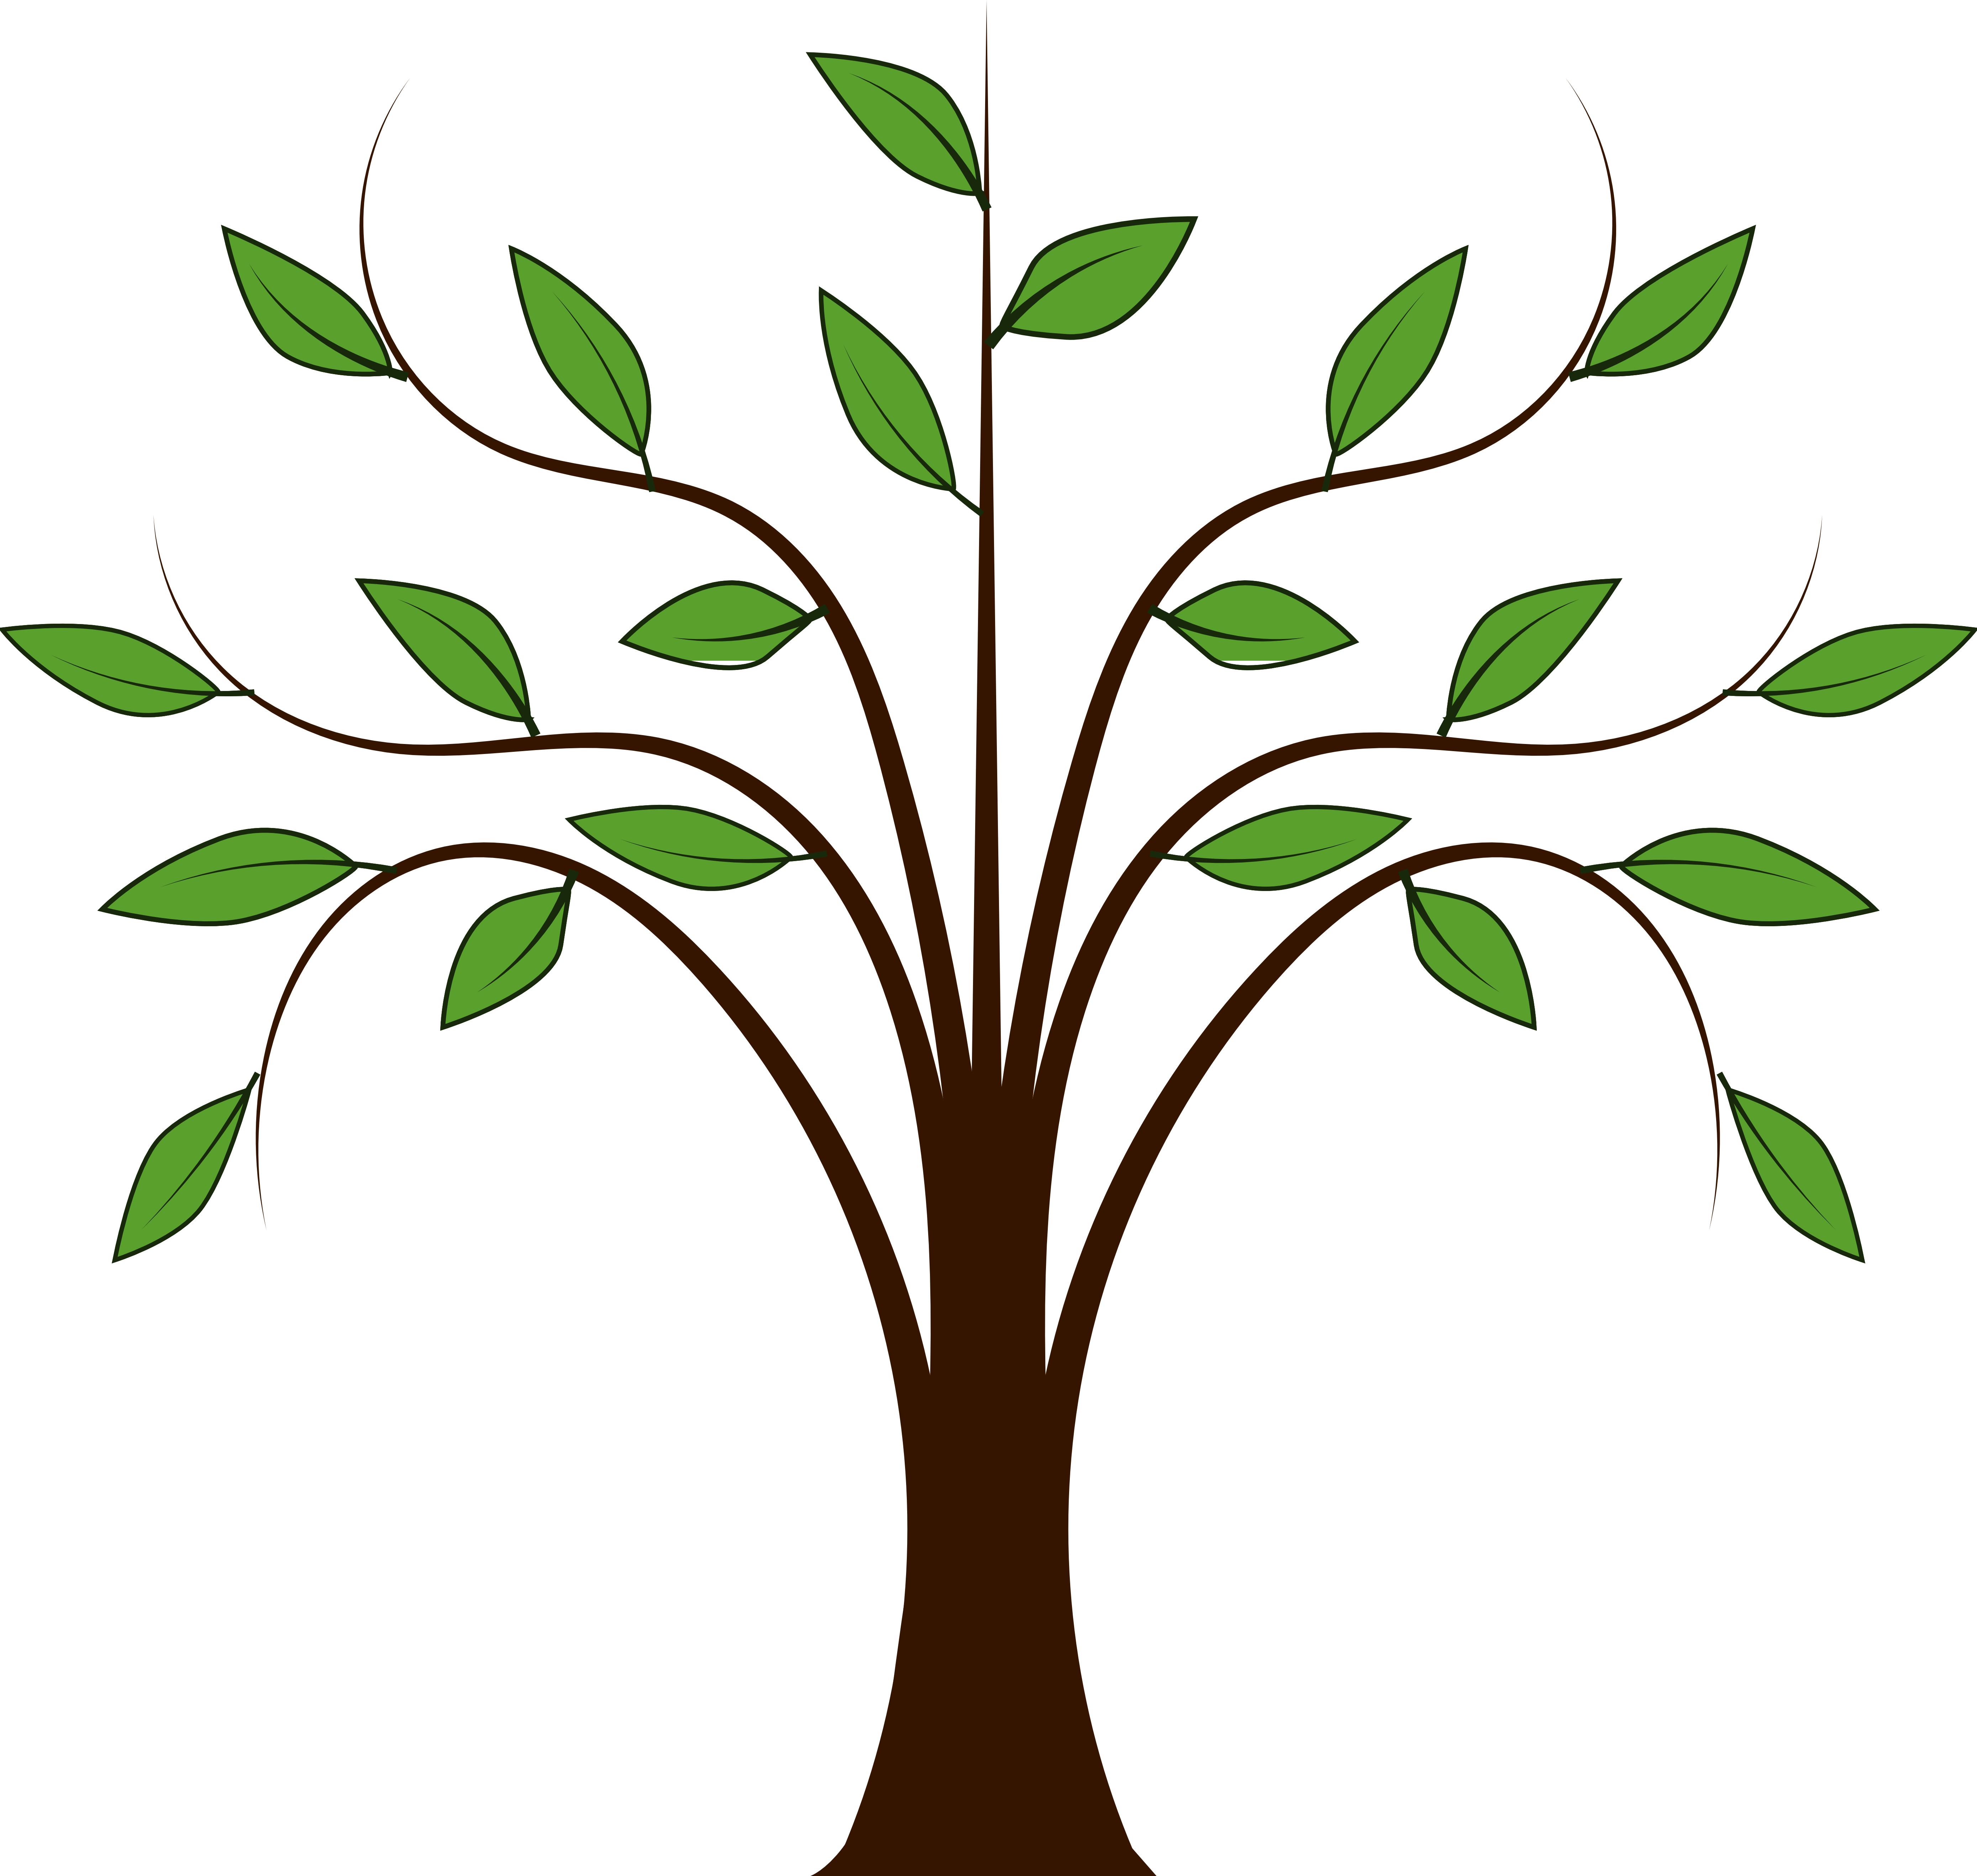 Trees Family Tree Images Hd Image Clipart